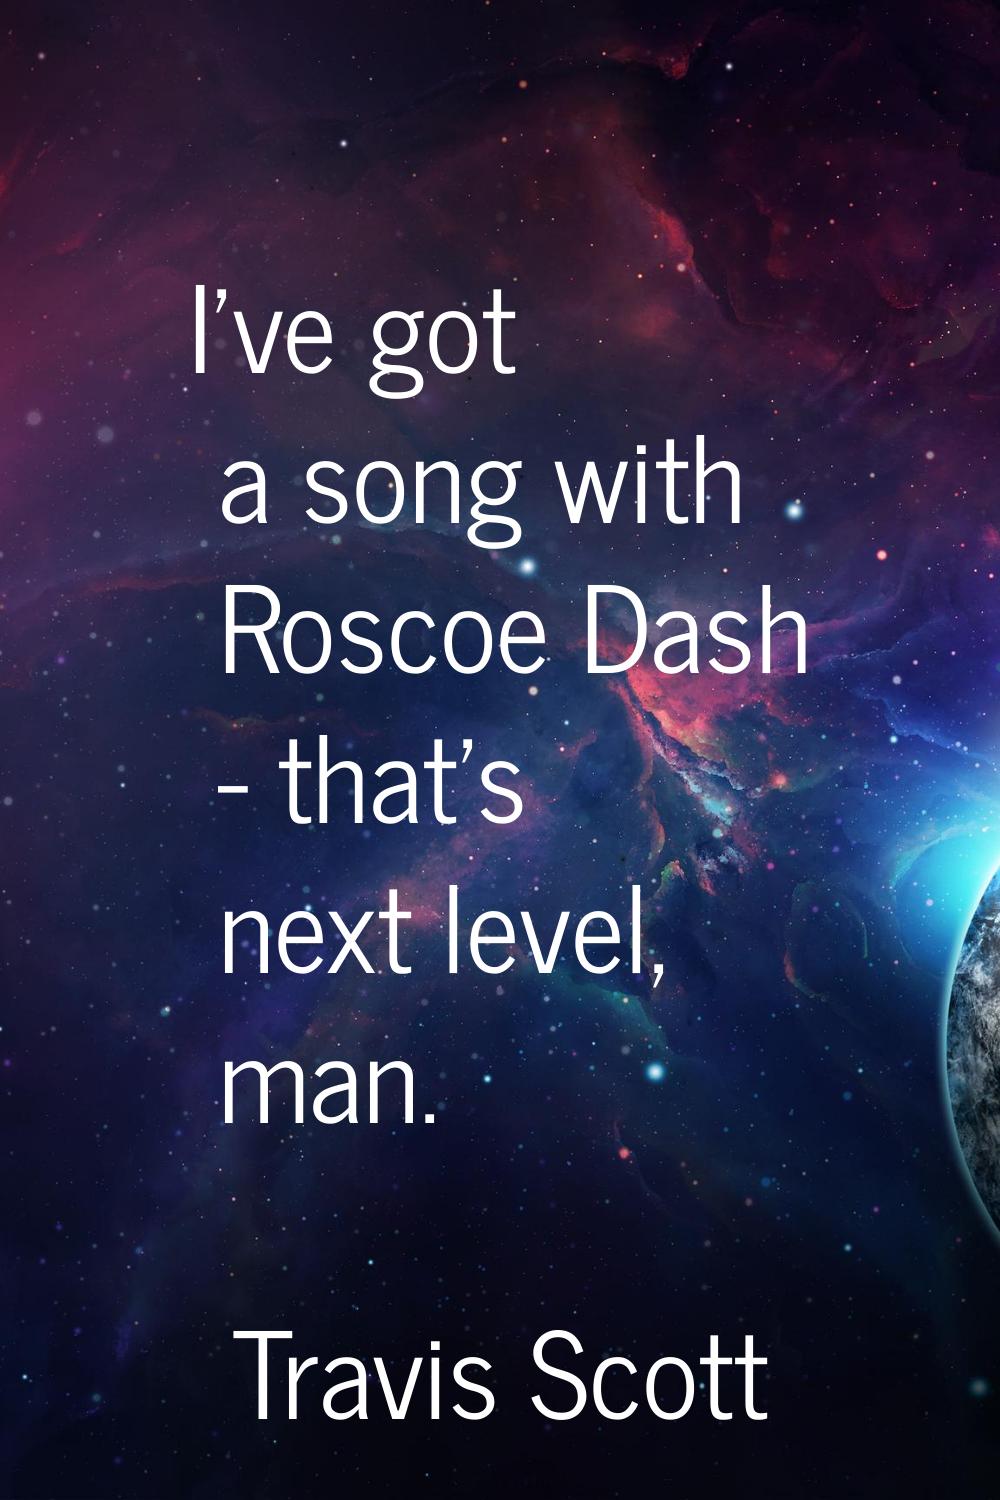 I've got a song with Roscoe Dash - that's next level, man.